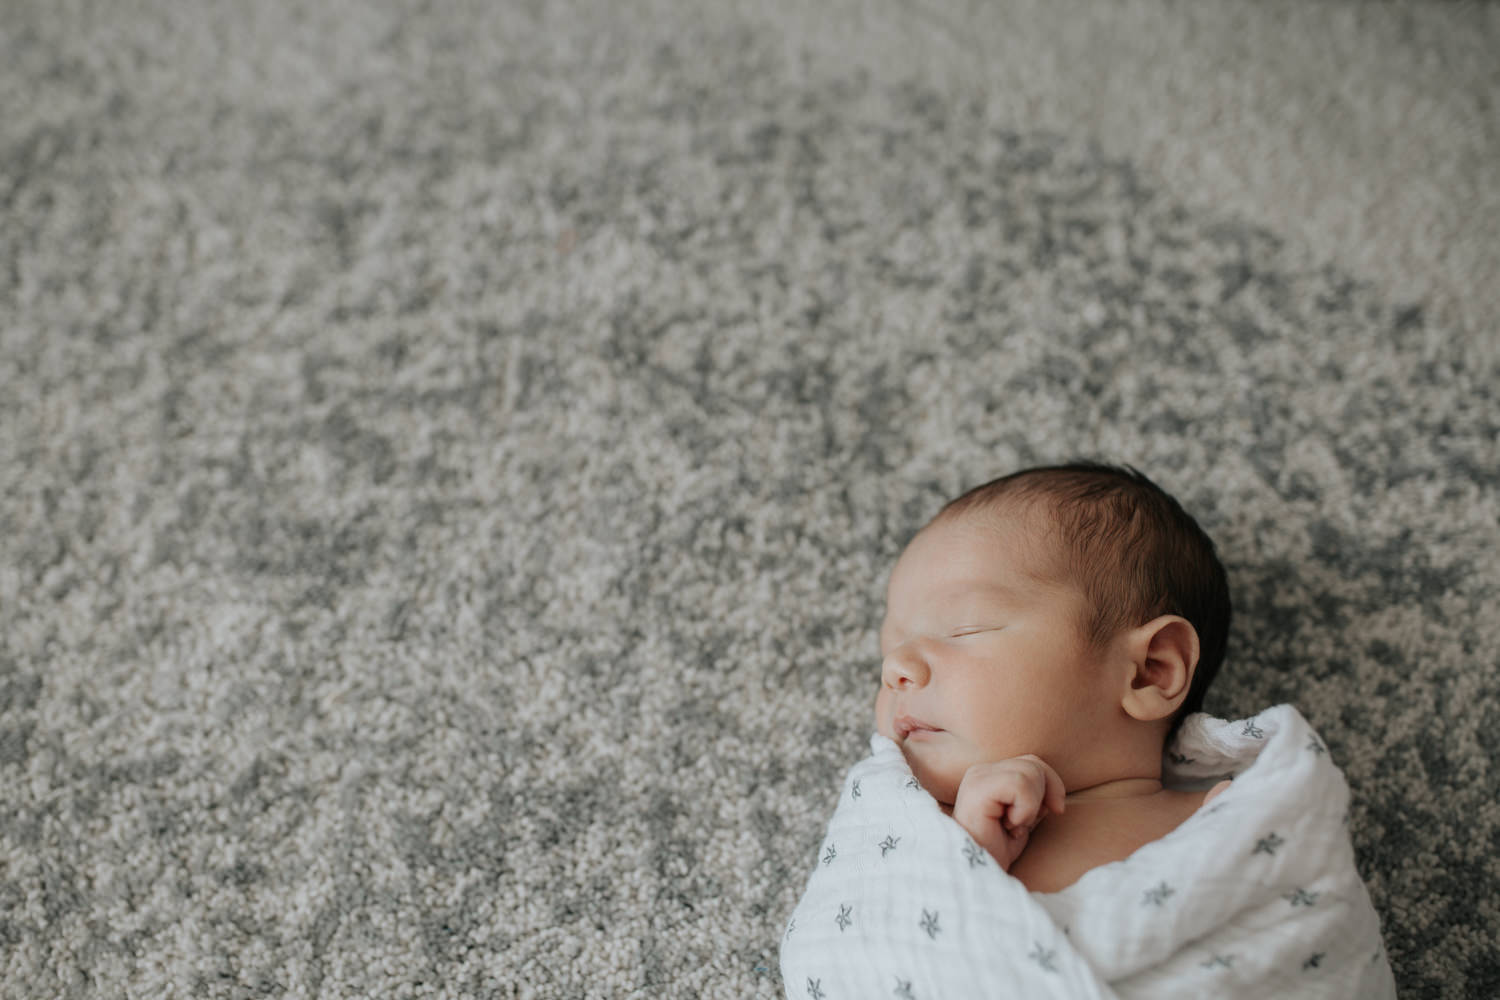 2 week old baby boy with dark hair and olive skin wrapped in swaddle with star on it, sleeping with hands near face - York Region In-Home Photos